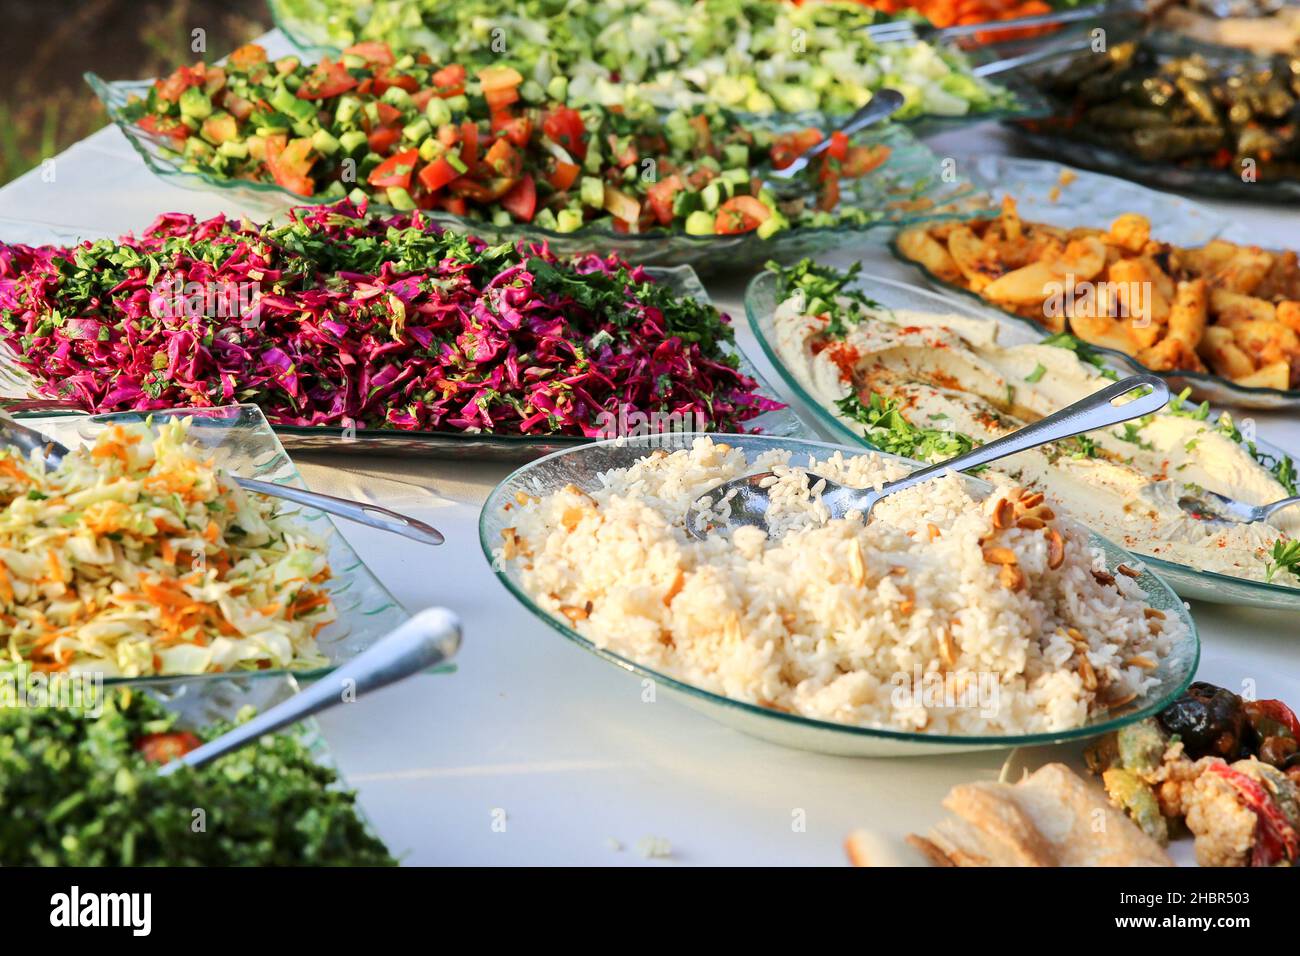 Outdoor catering. A salad bar on a buffet table Stock Photo